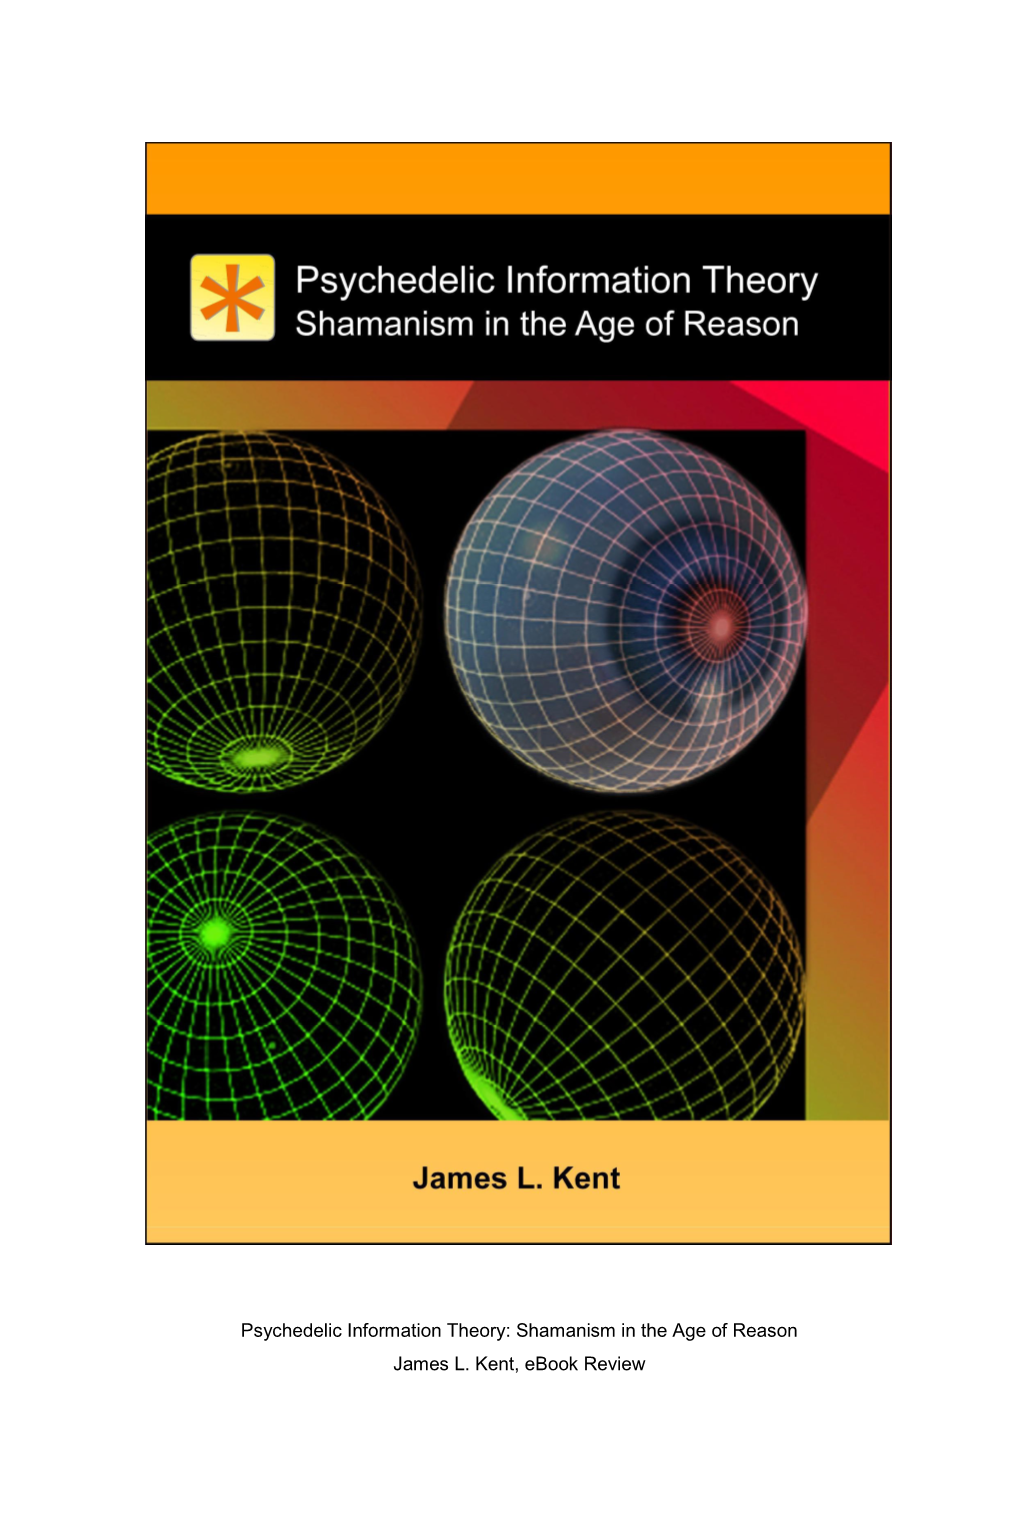 Psychedelic Information Theory: Shamanism in the Age of Reason James L